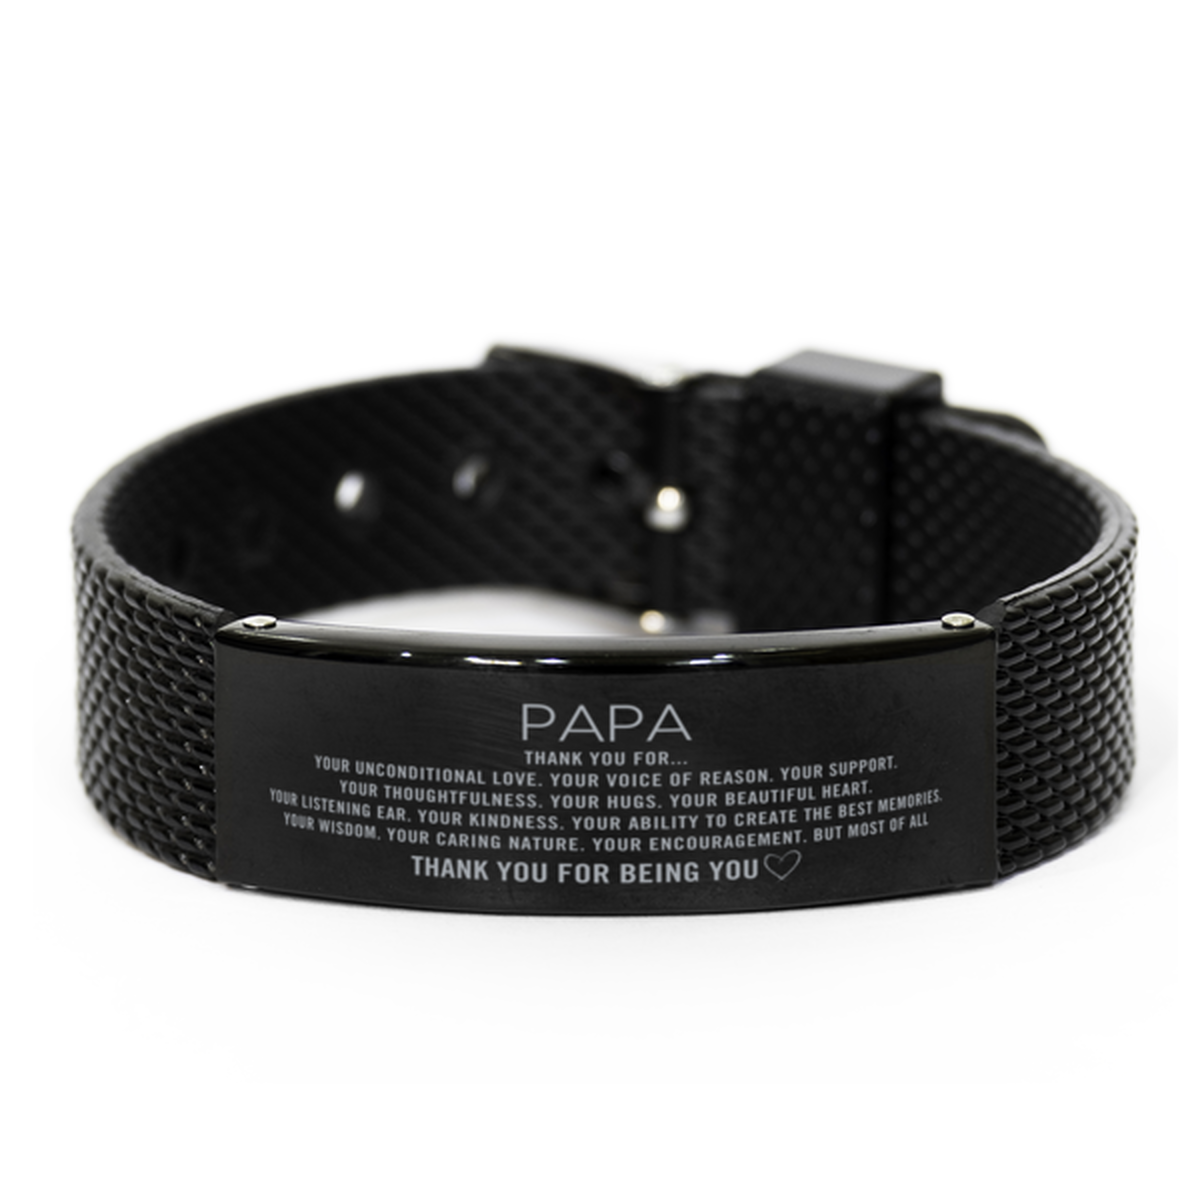 Papa Black Shark Mesh Bracelet Custom, Engraved Gifts For Papa Christmas Graduation Birthday Gifts for Men Women Papa Thank you for Your unconditional love